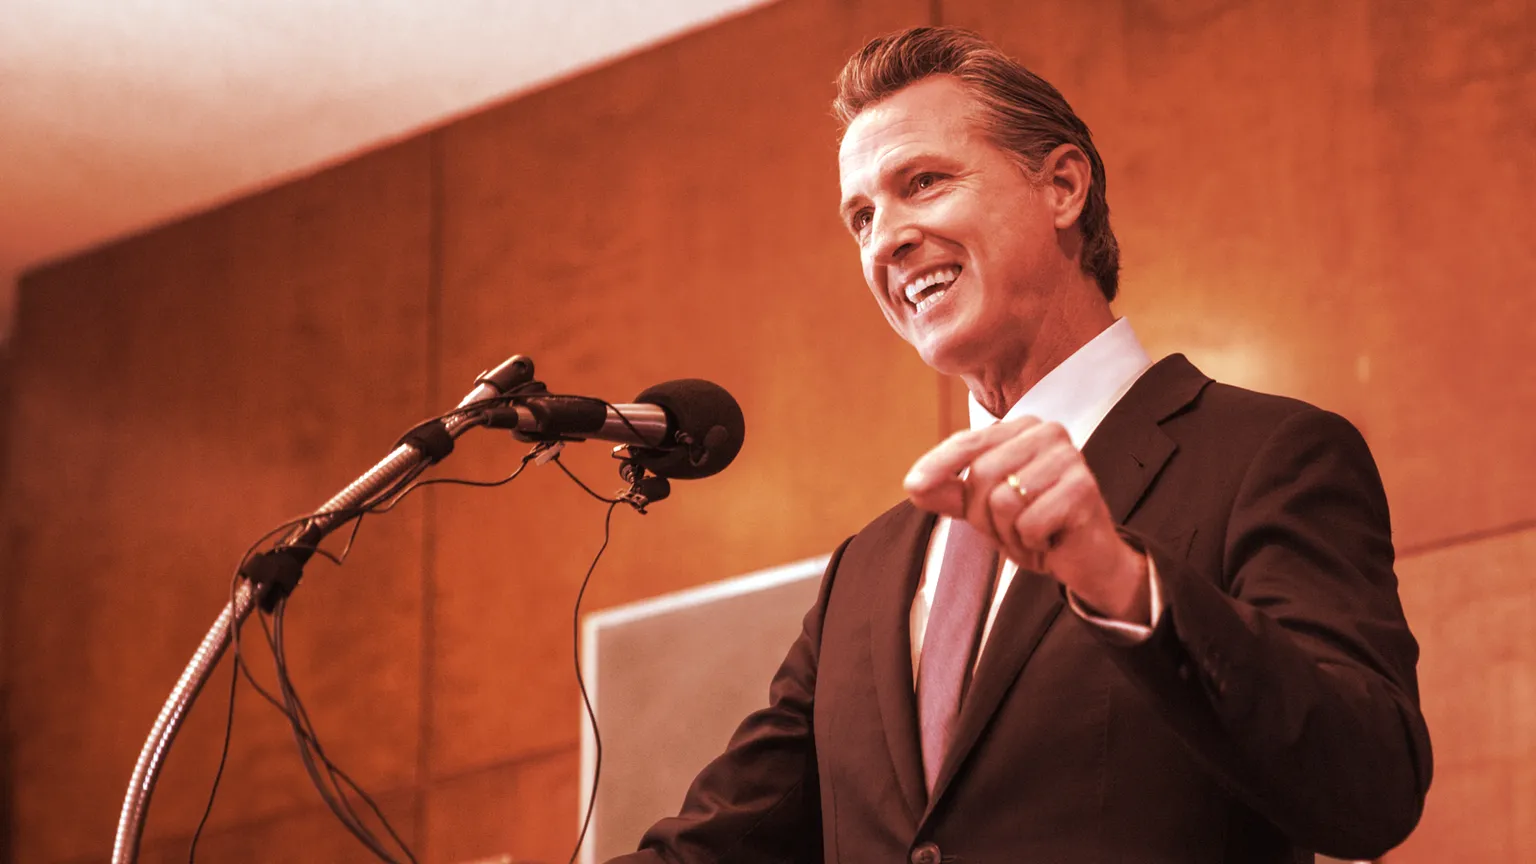 San Francisco, USA. Sept. 14, 2021. California Gov. Gavin Newsom, speaks at a labor union event in SF on Election Day, September 14, 2021, for the 2021 California gubernatorial recall election.